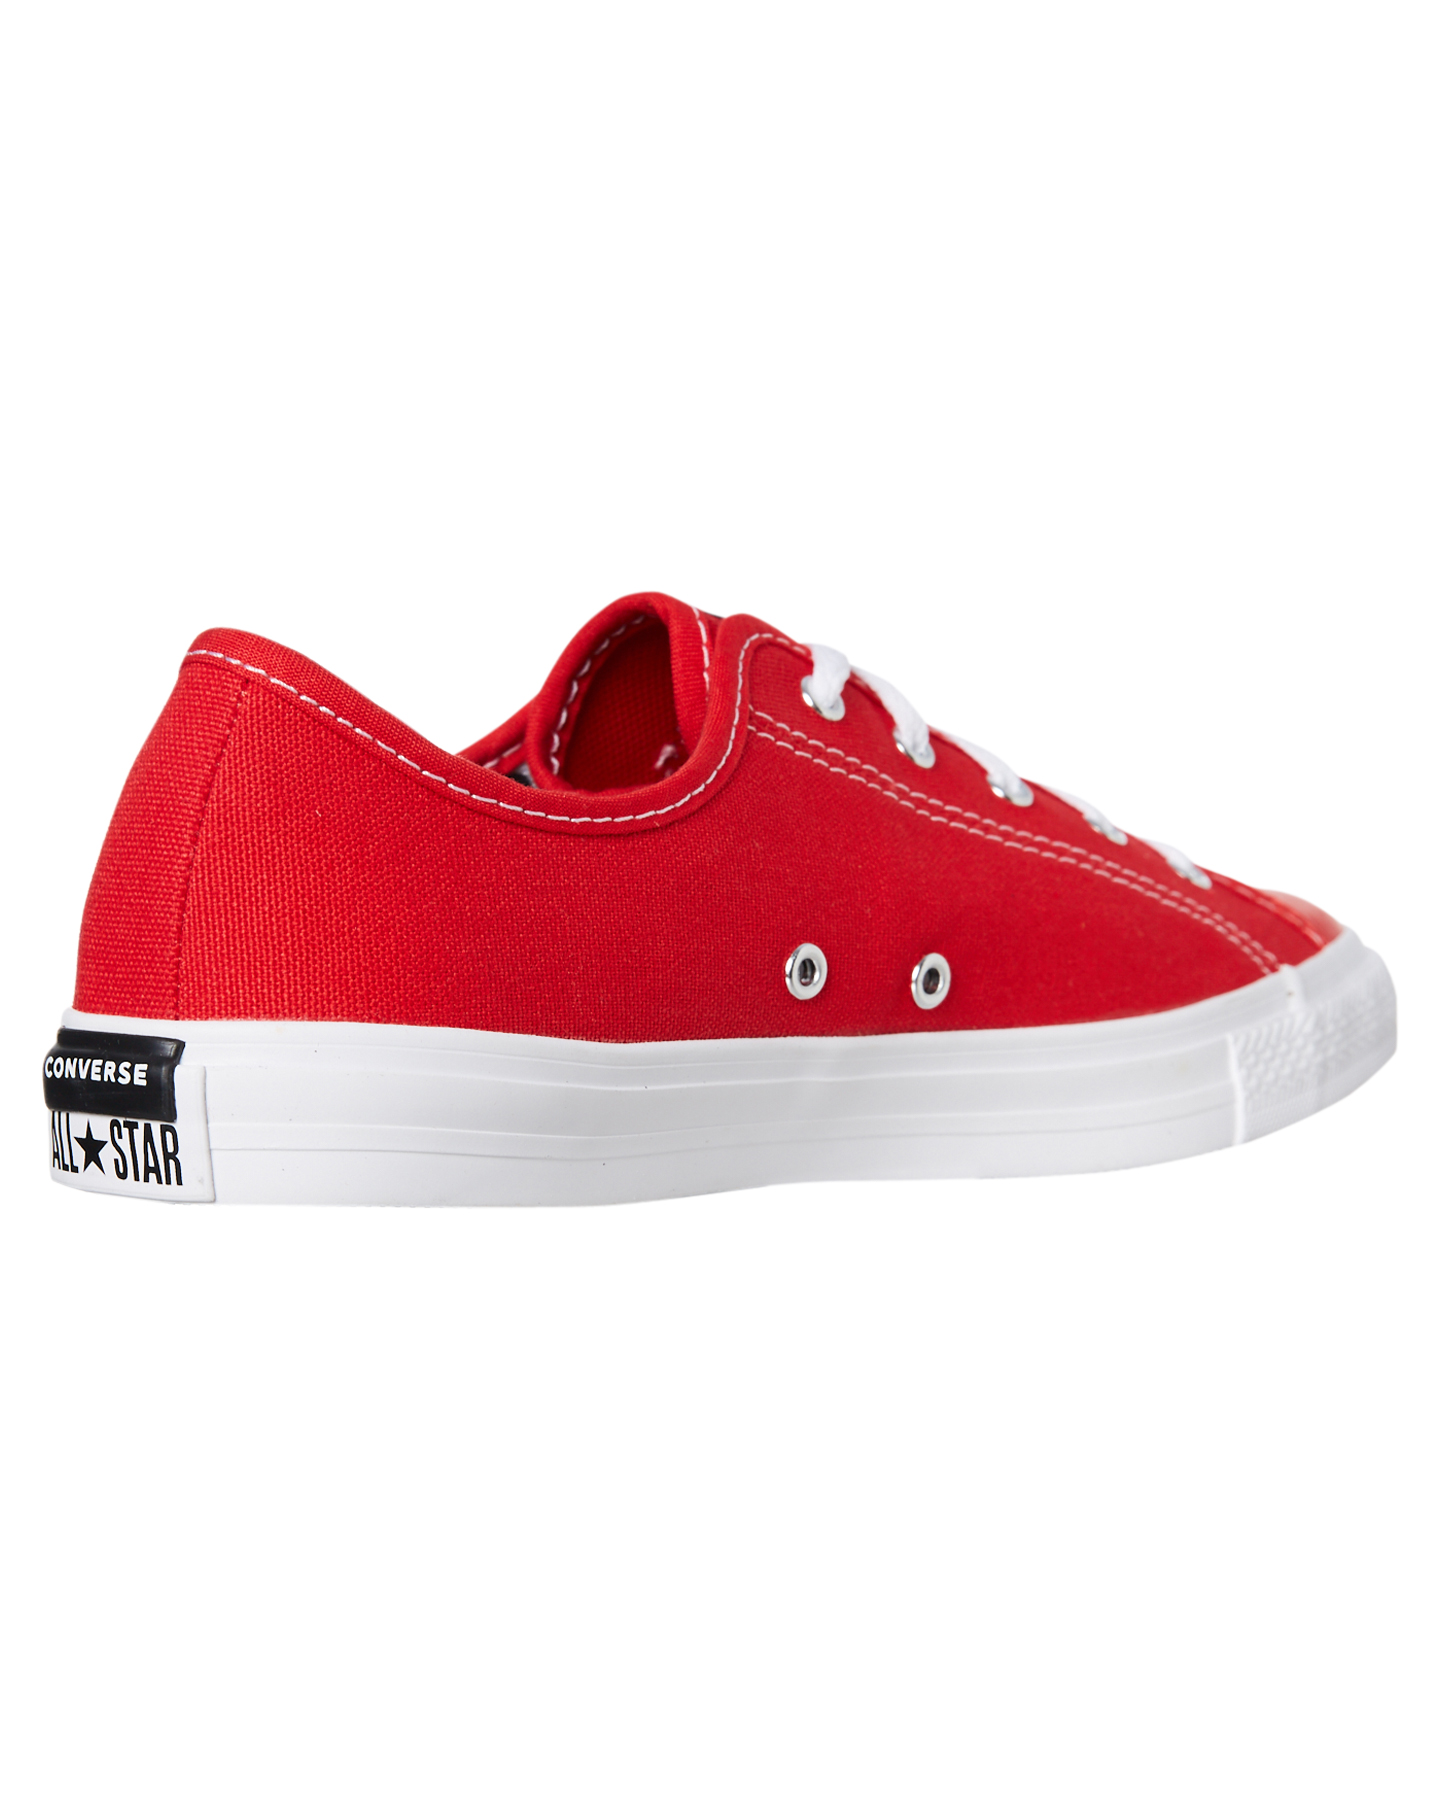 Converse Womens Chuck Taylor All Star Dainty Shoe - University Red ...